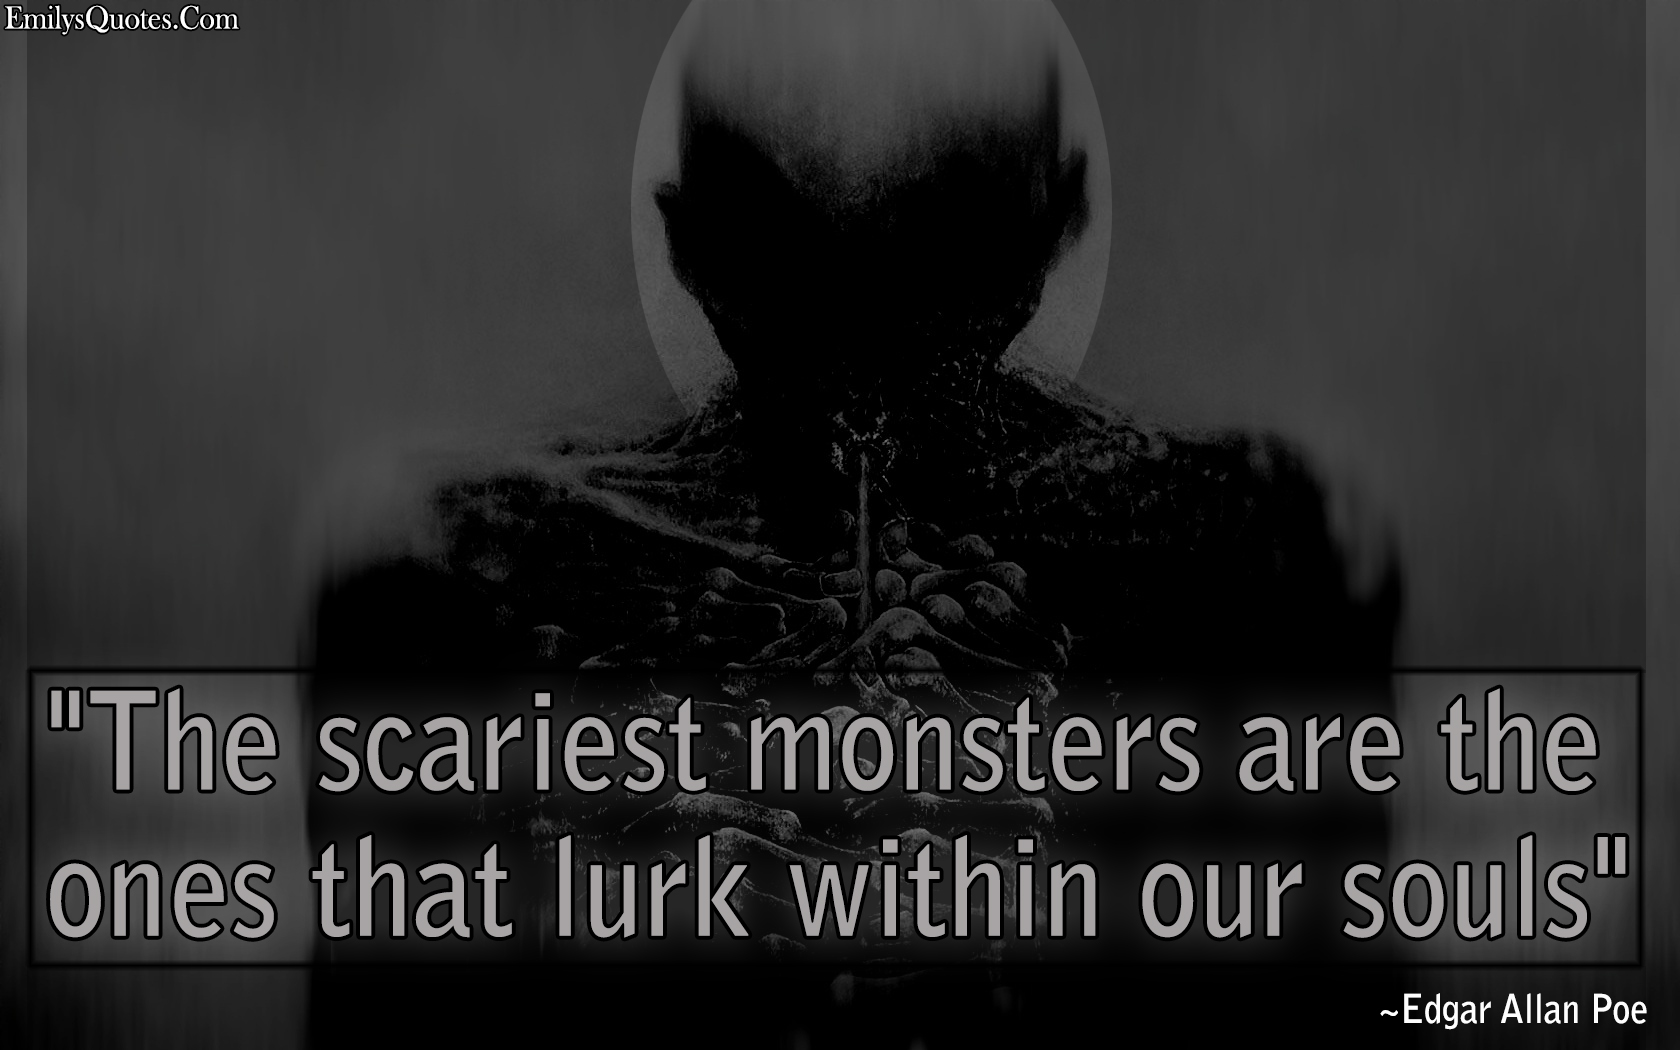 Poe Quotes Wallpaper Evil Quotes HD Wallpaper Monster Quotes